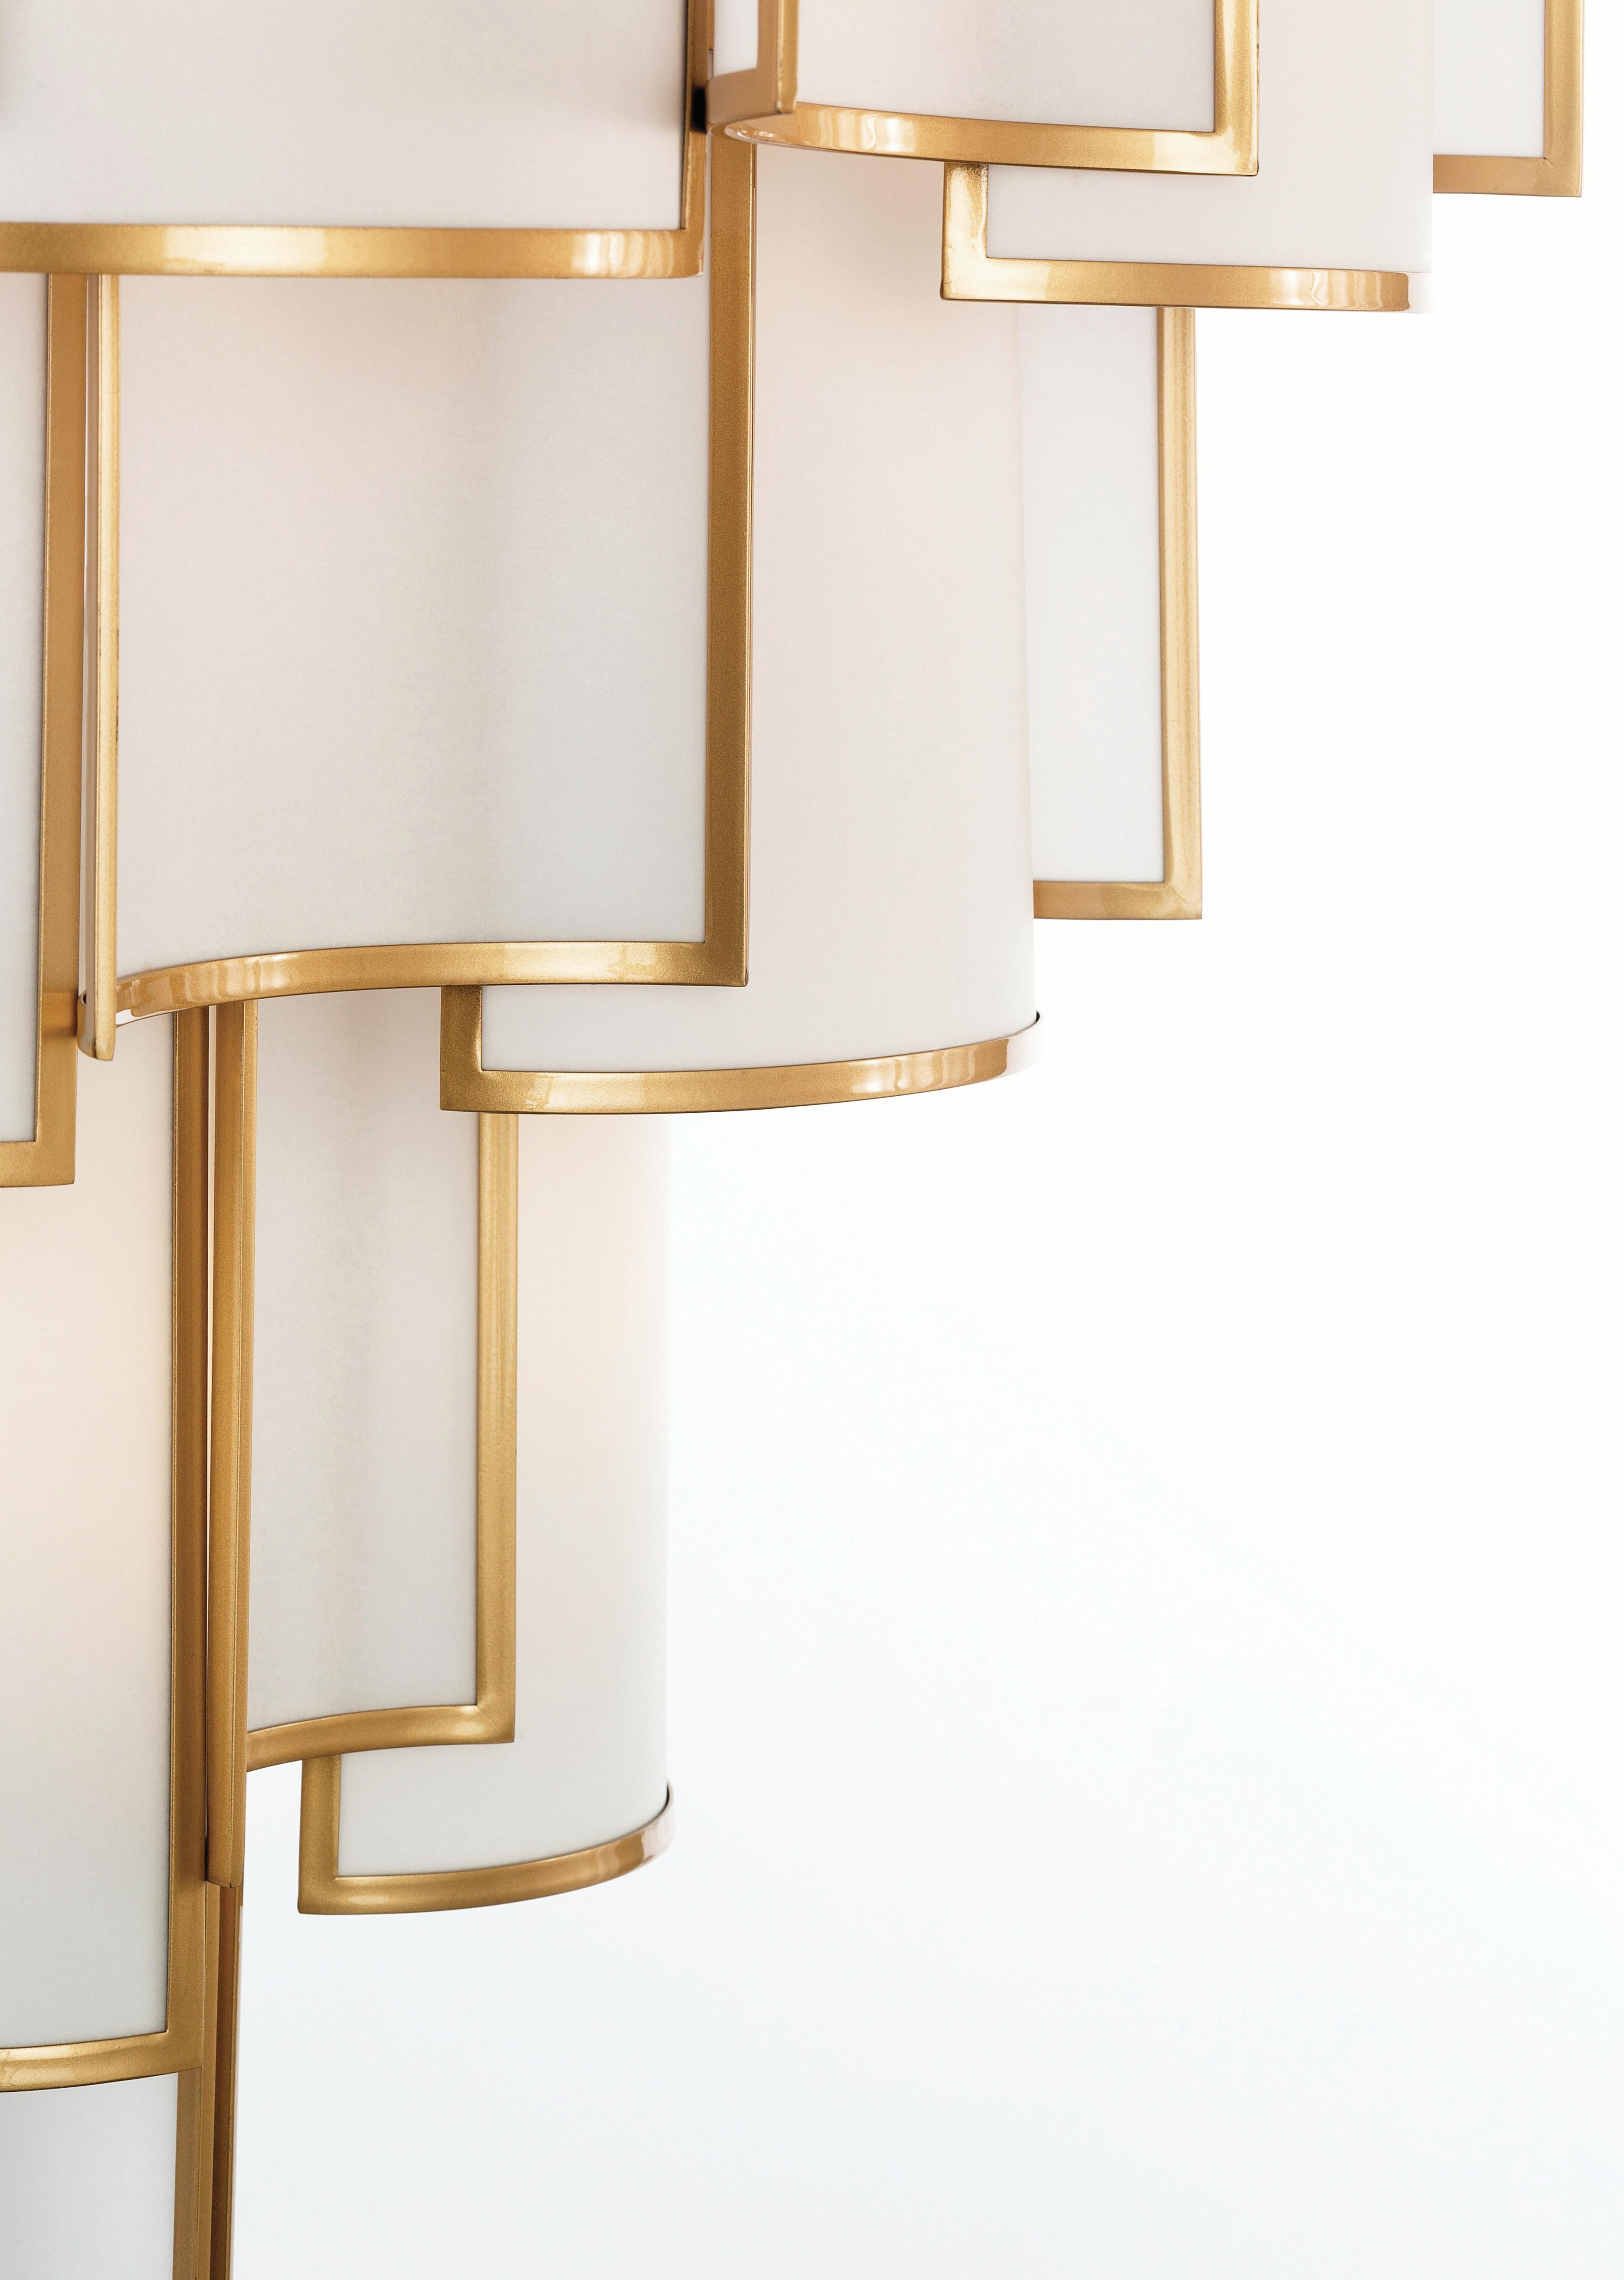 Shade Collection - A composition of small curved framed panels that create a luminous movement, also available in other finishes and fabrics, as well as sizes. All Officina Luce items are customizable.

Main structure in natural brass in satin